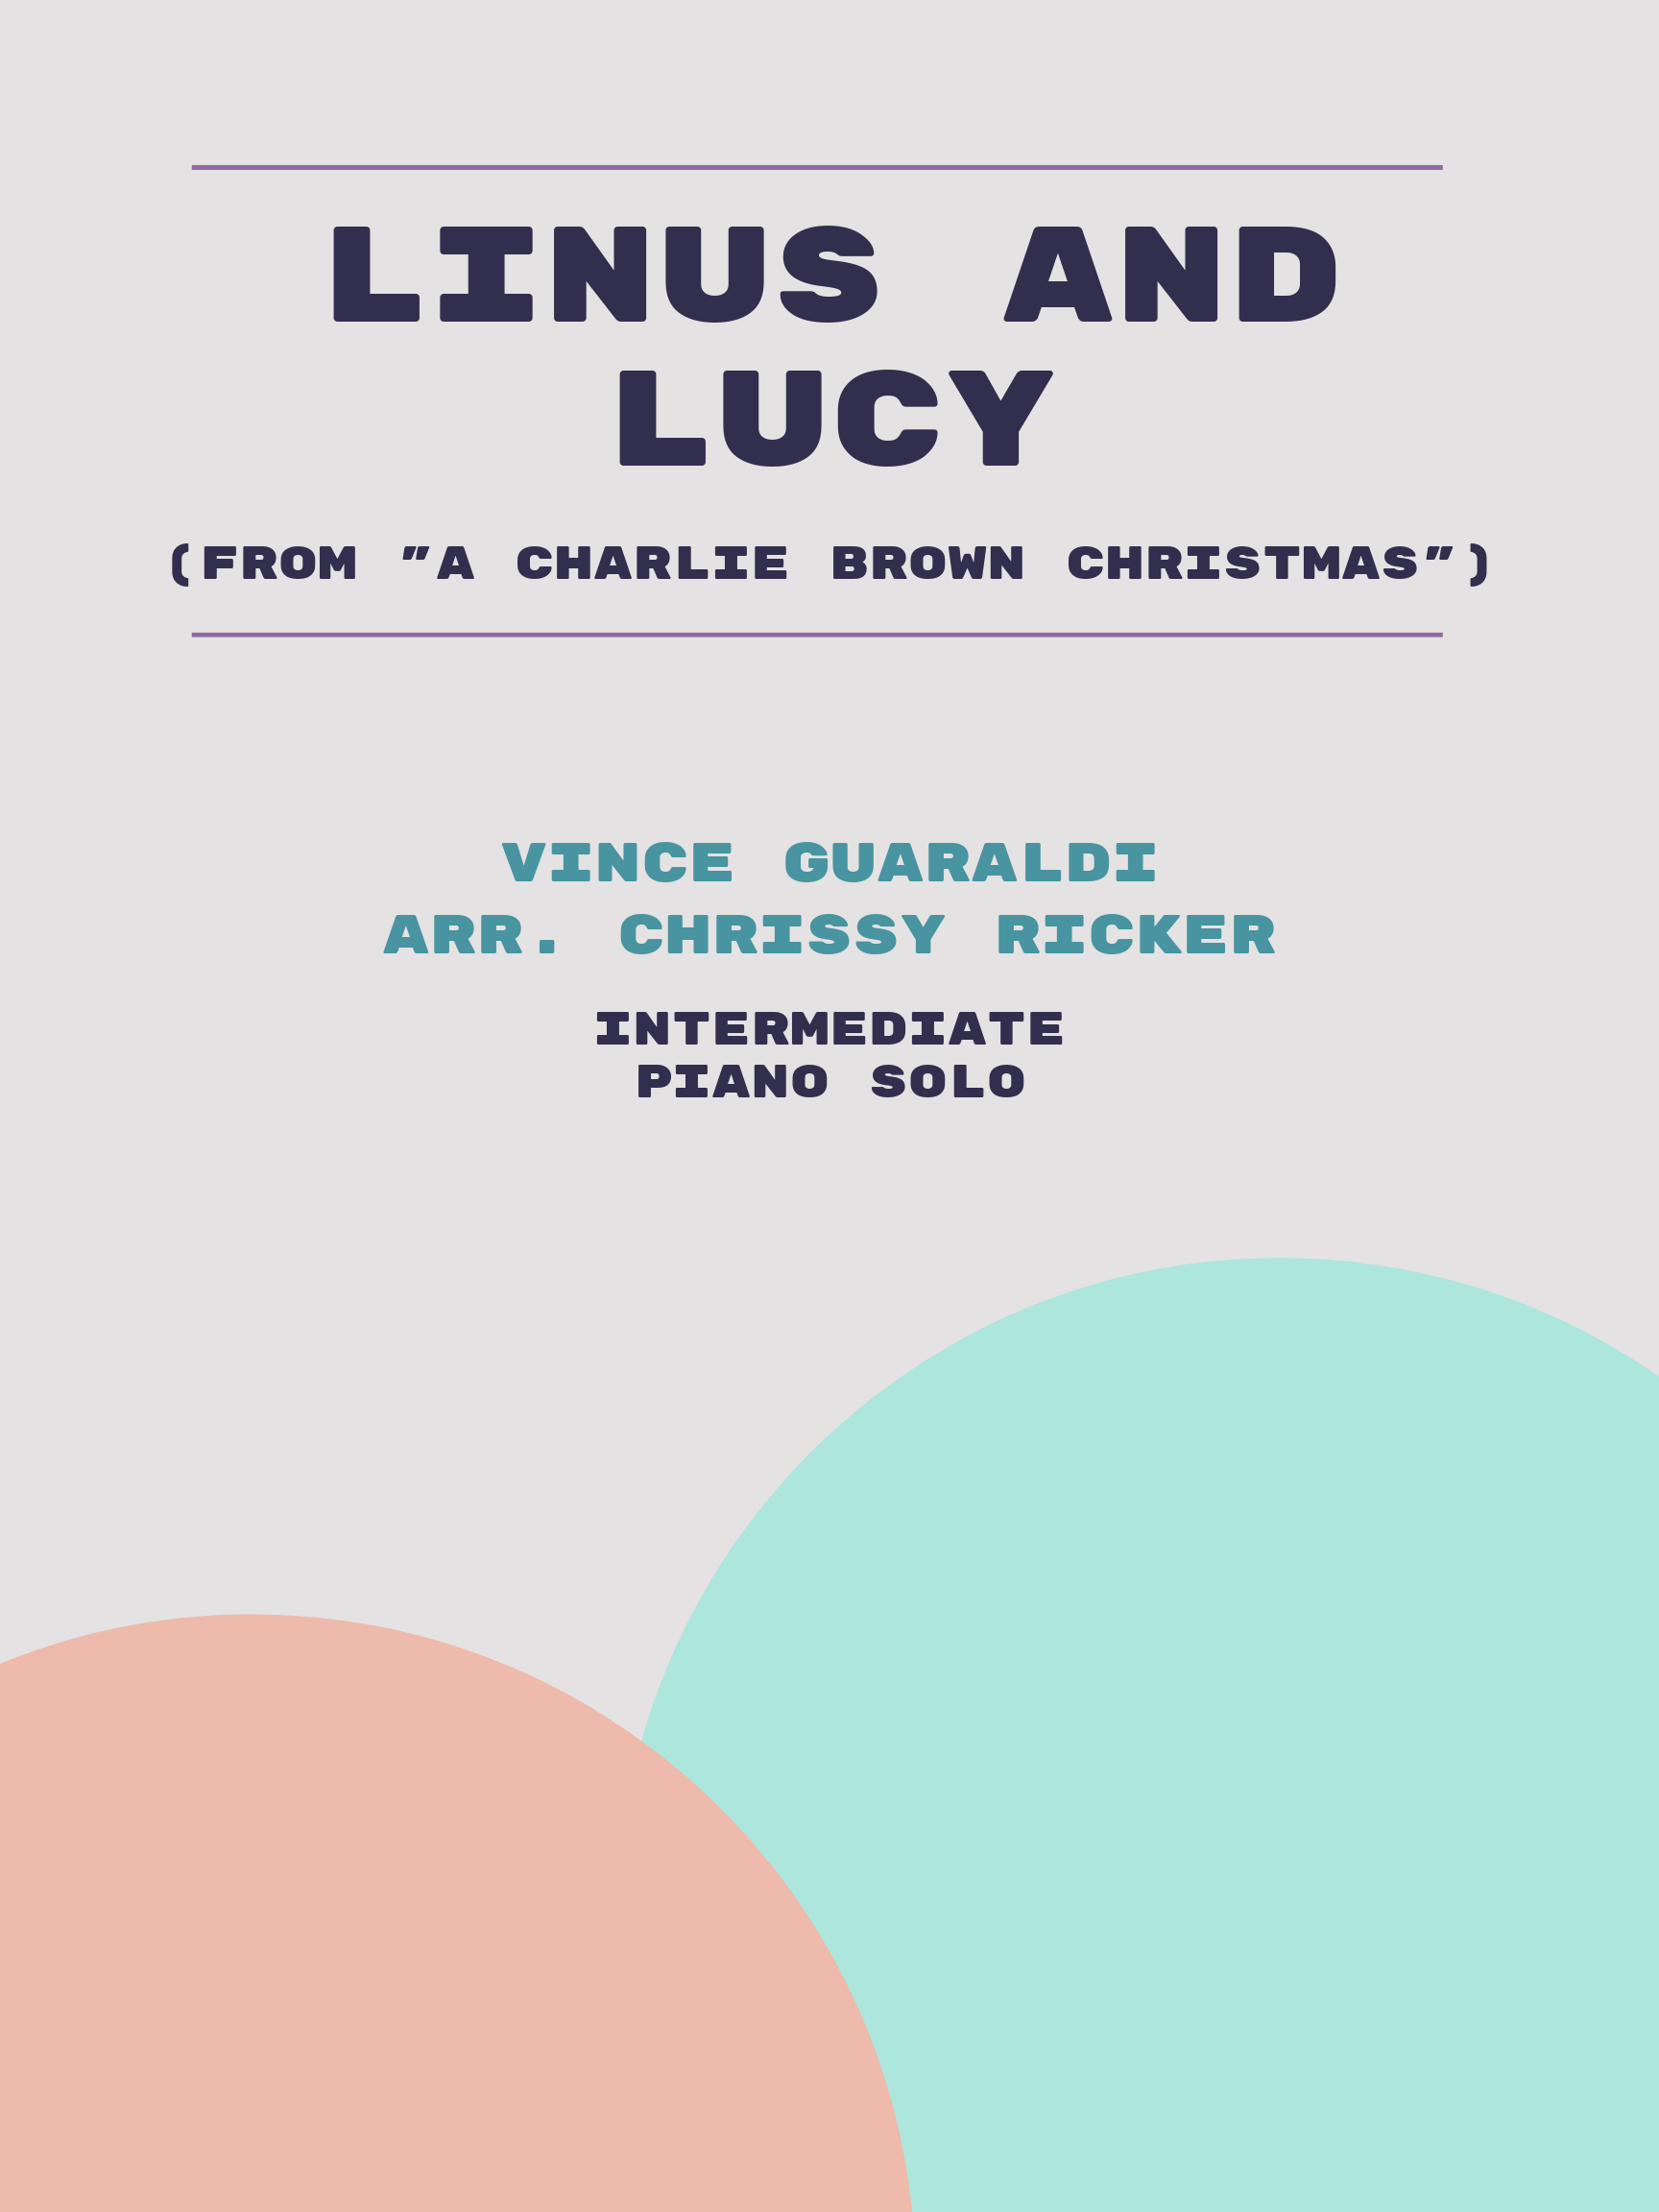 Linus and Lucy by Vince Guaraldi